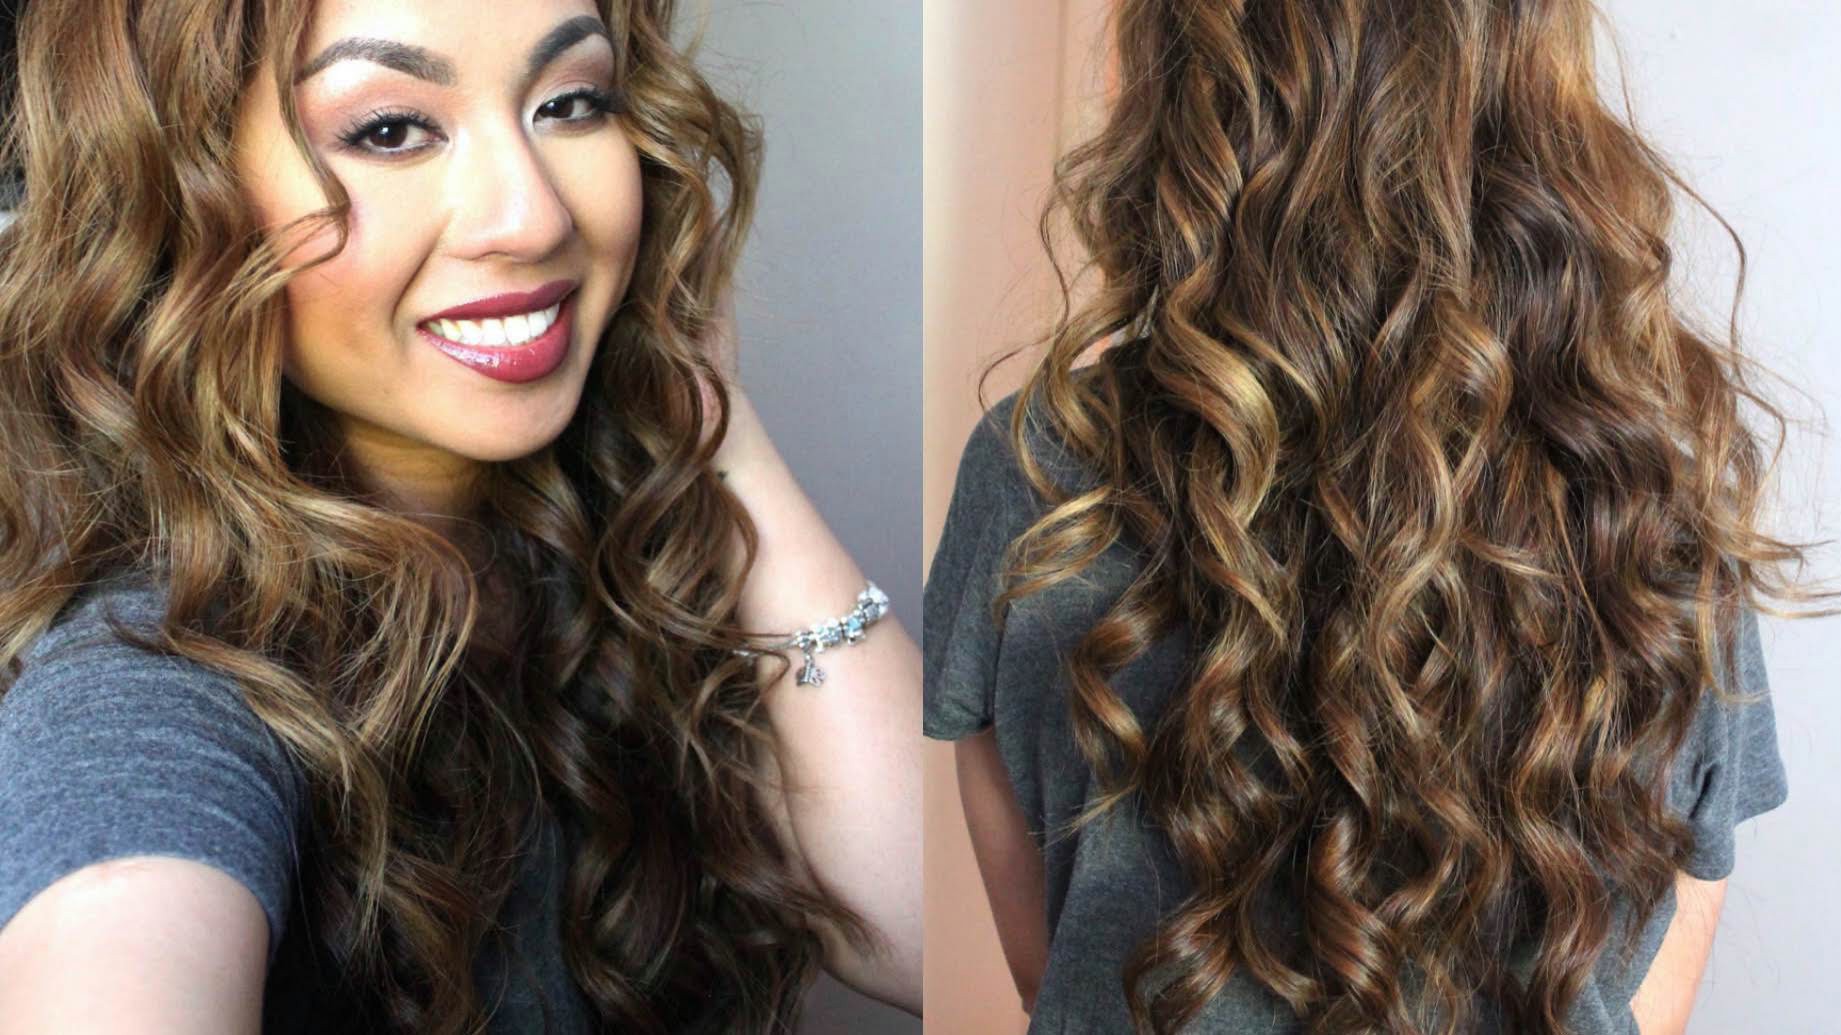 How To Curl Men's Hair With Curling Iron - Curly Hair Style